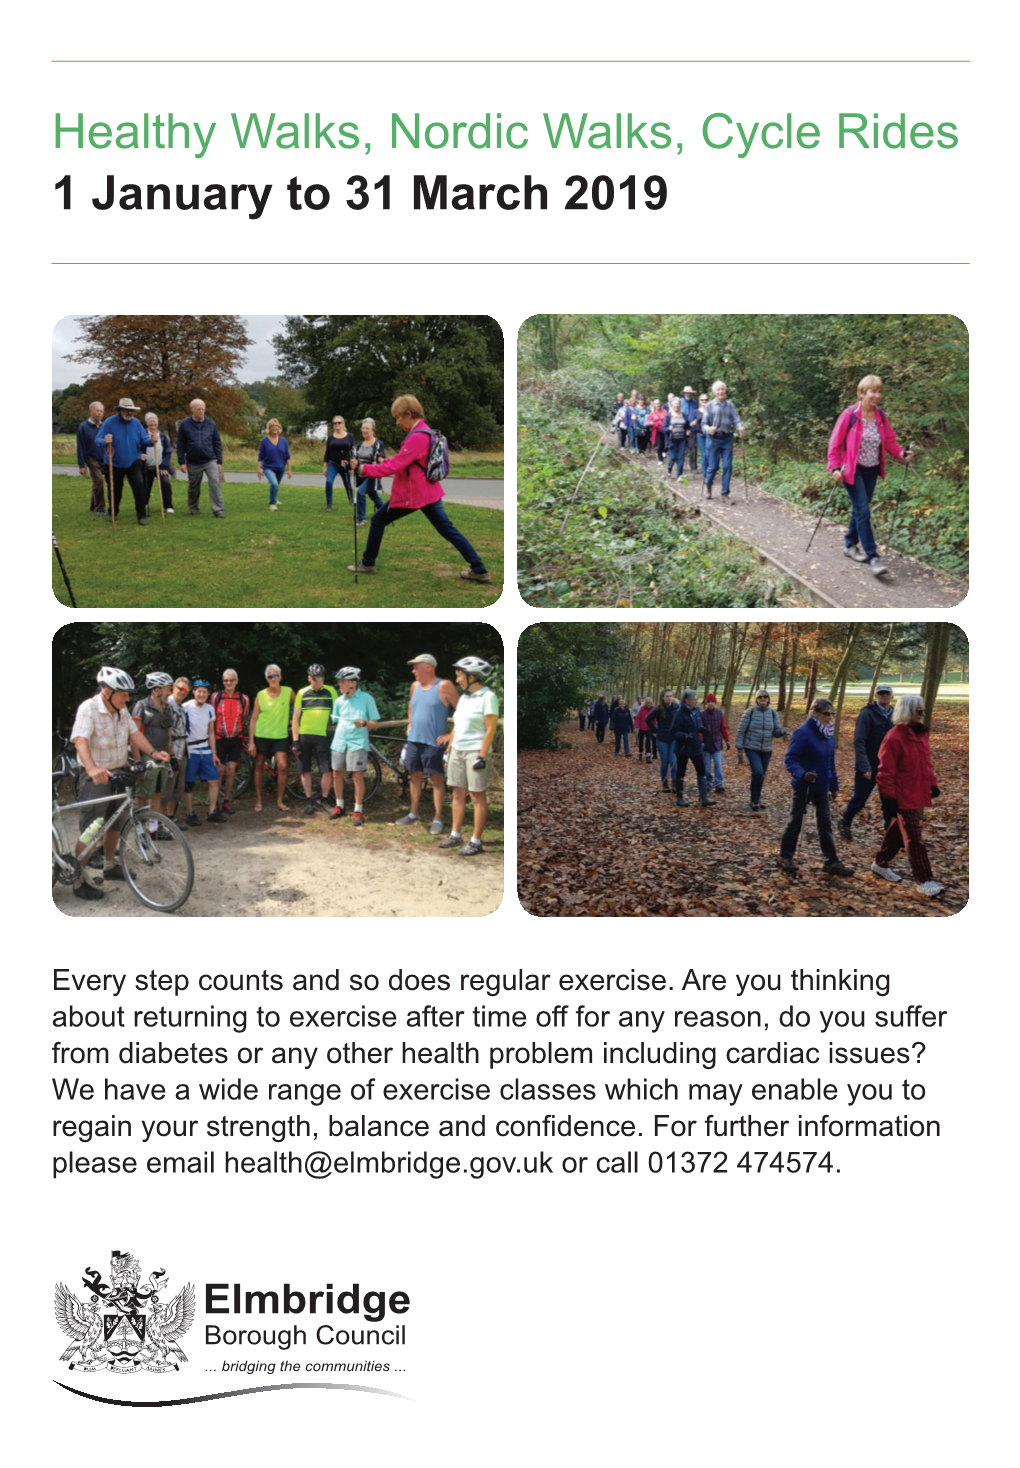 Healthy Walks, Nordic Walks, Cycle Rides 1 January to 31 March 2019